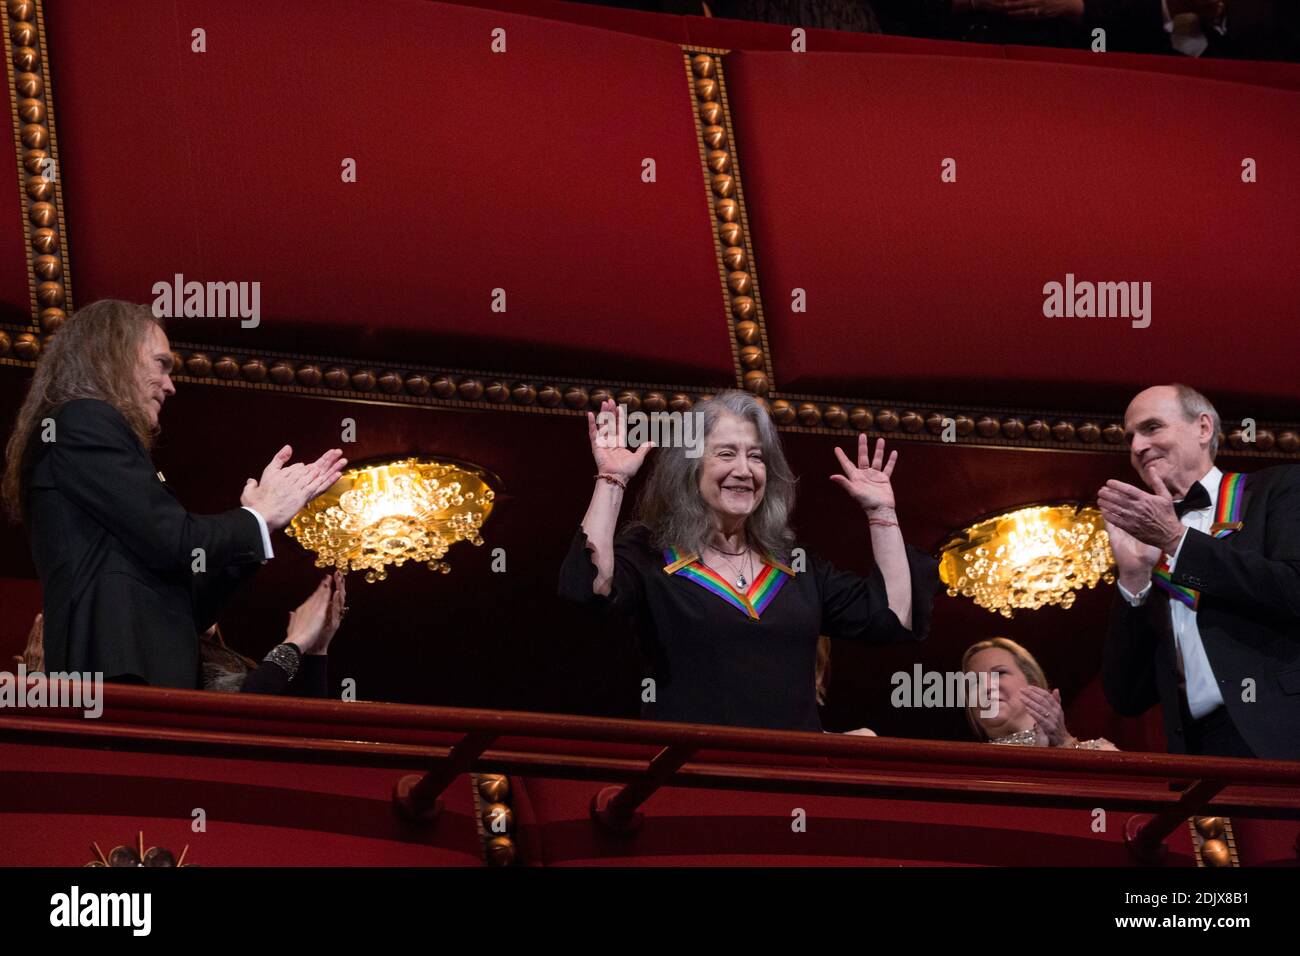 2016 Kennedy Center Honoree pianist Martha Argerich waves at the beginning of the Kennedy Center Honors, at the Kennedy Center, December 4, 2016, Washington, DC. Honorees include actor Al Pacino, singer James Taylor, members of the band Eagles, pianist Martha Argerich and singer Mavis Staples. (Pool/Aude Guerrucci) Stock Photo